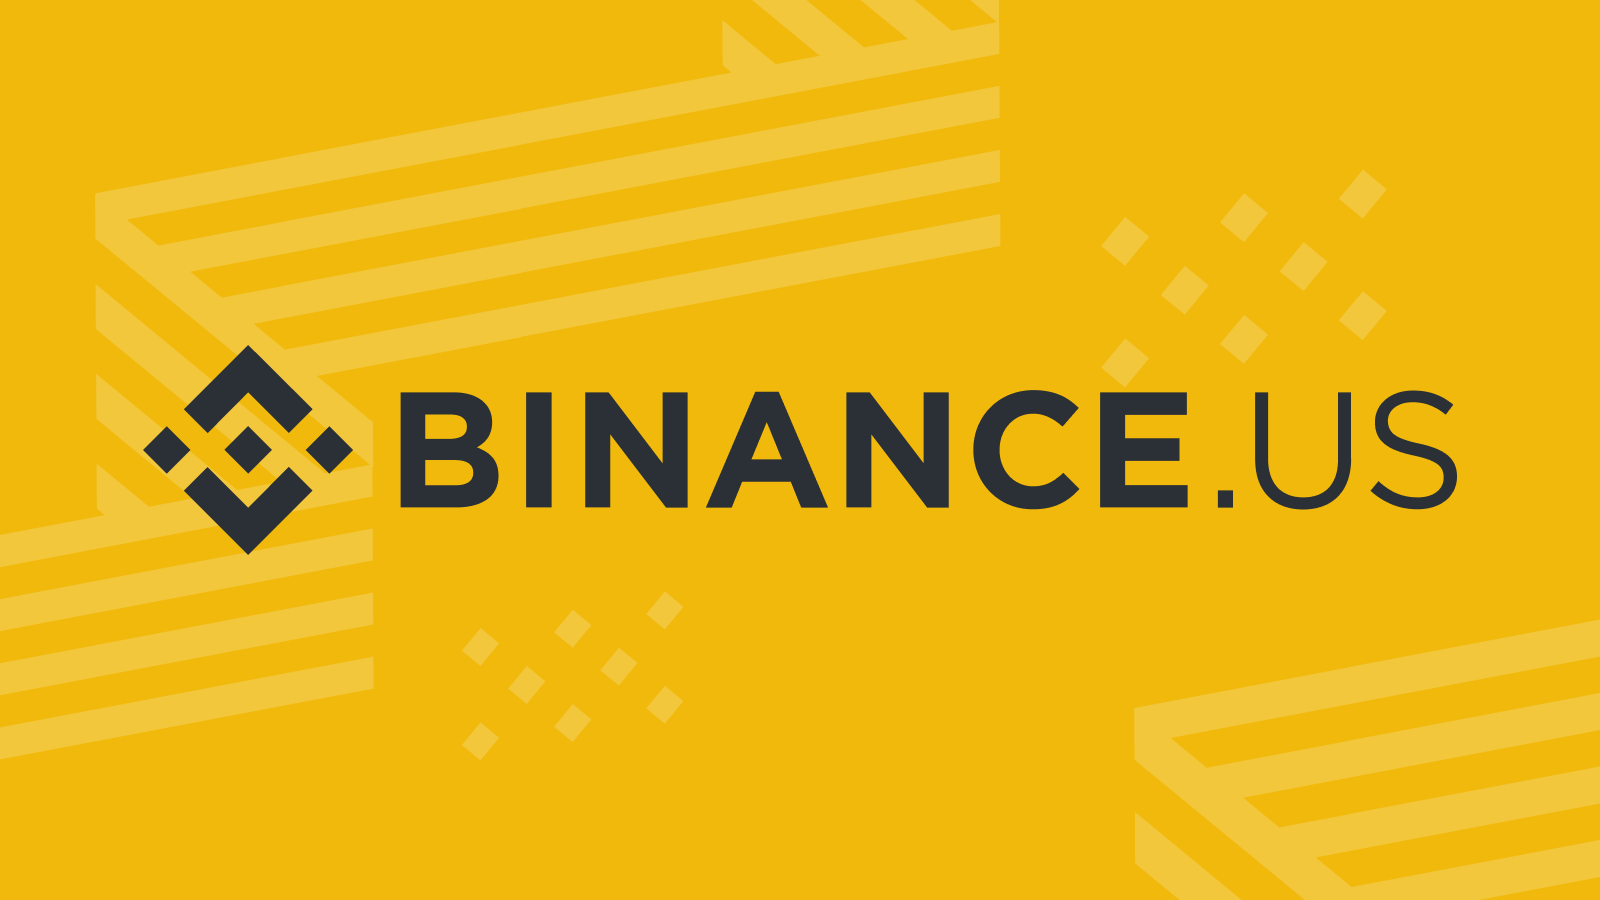 Binance.US Opposes SEC’s Request to Freeze its Assets as it Would End its Business